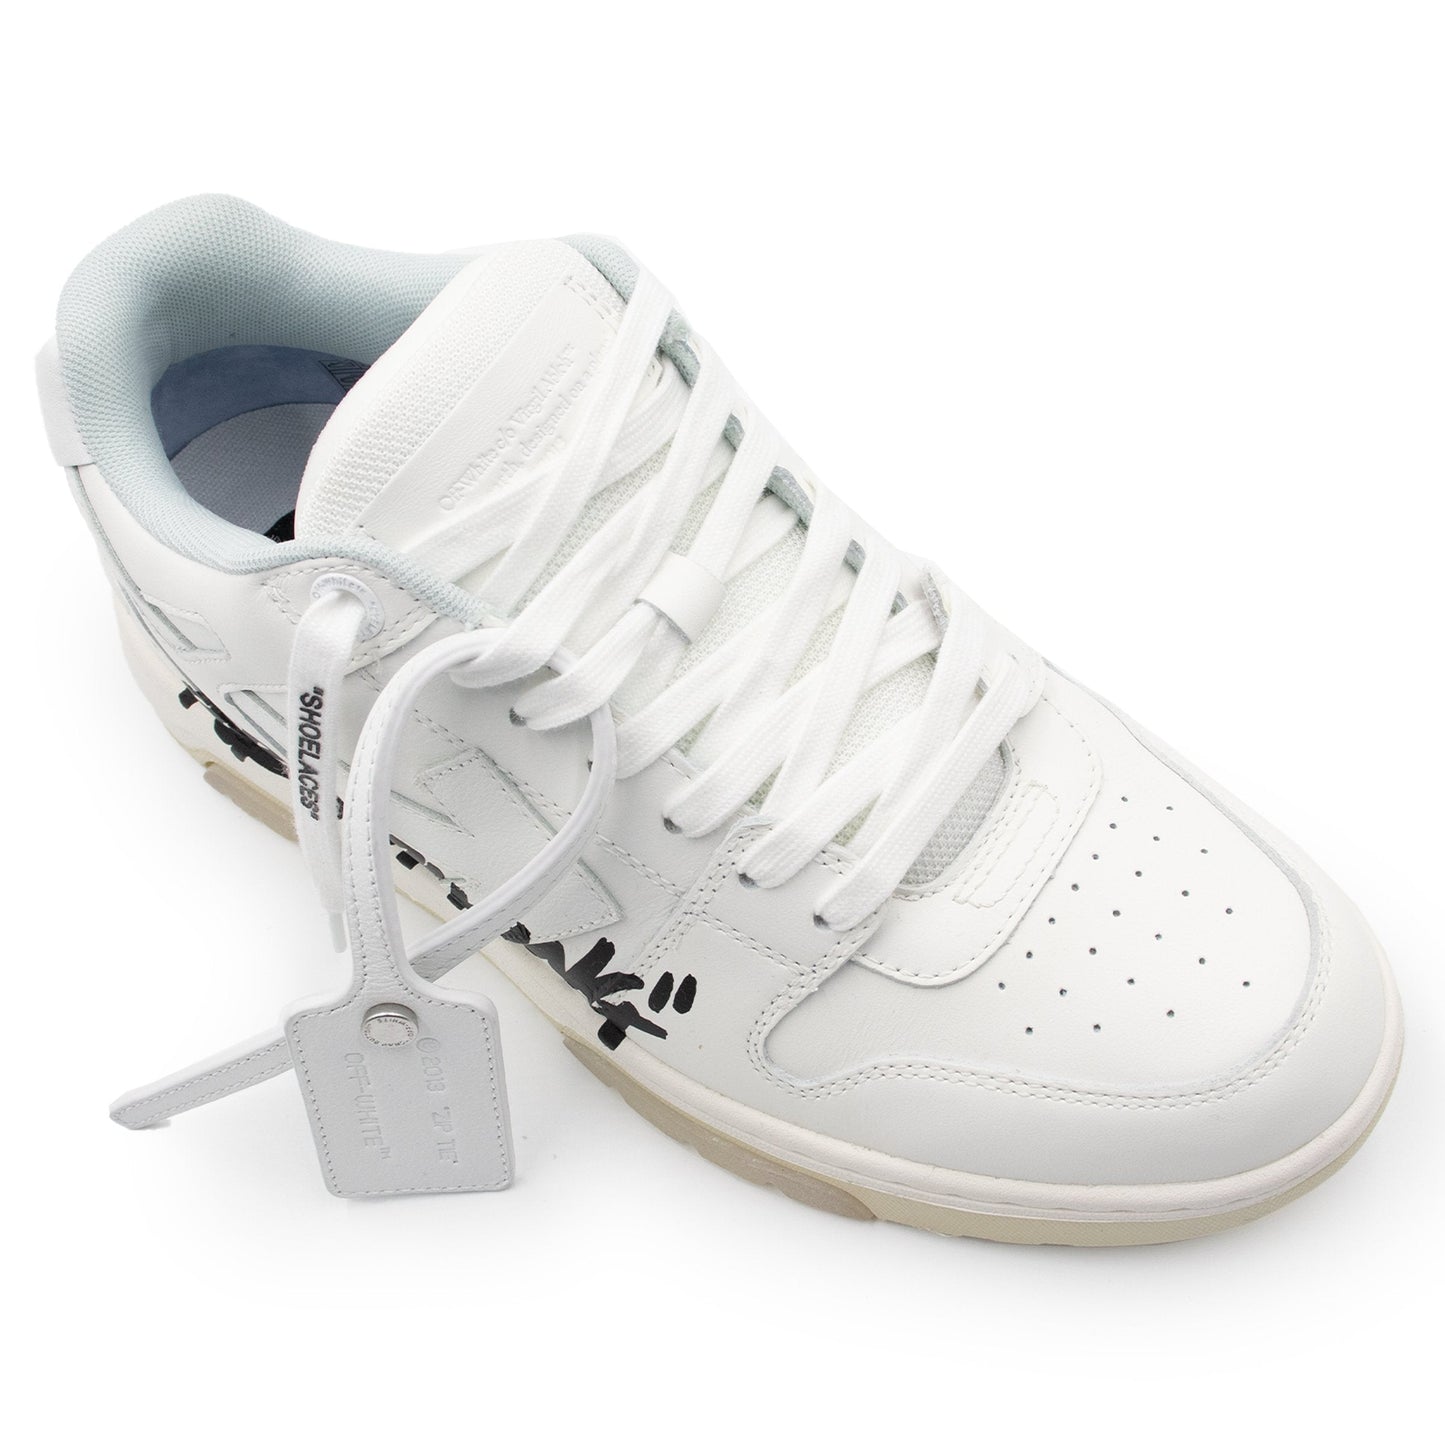 Out Of Office "For Walking" Sneakers in White & Black